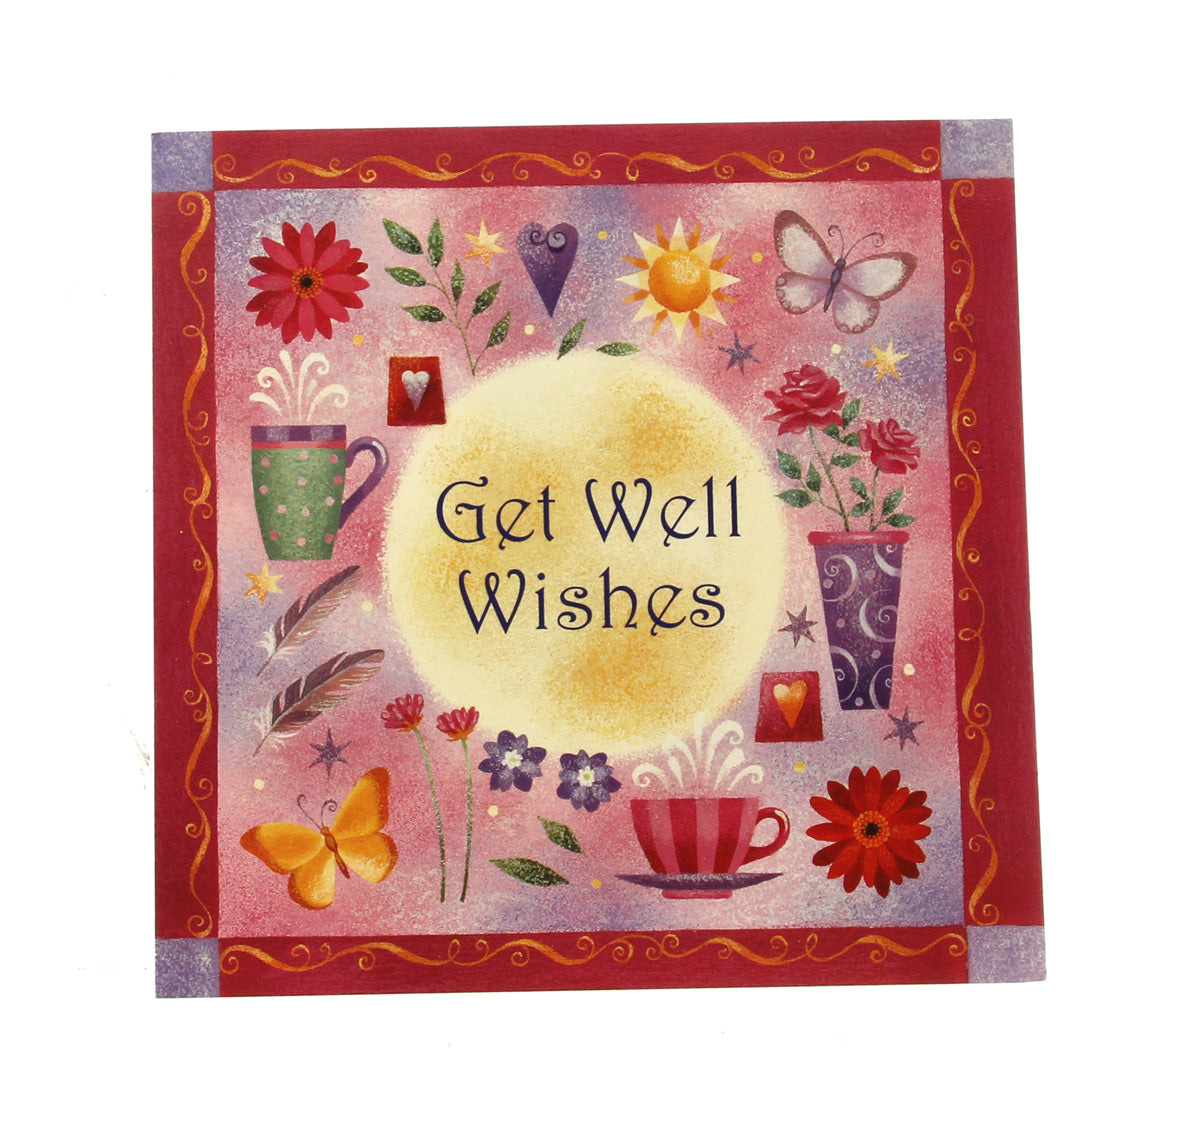 Get Well Card Qubes: Get Well Wishes